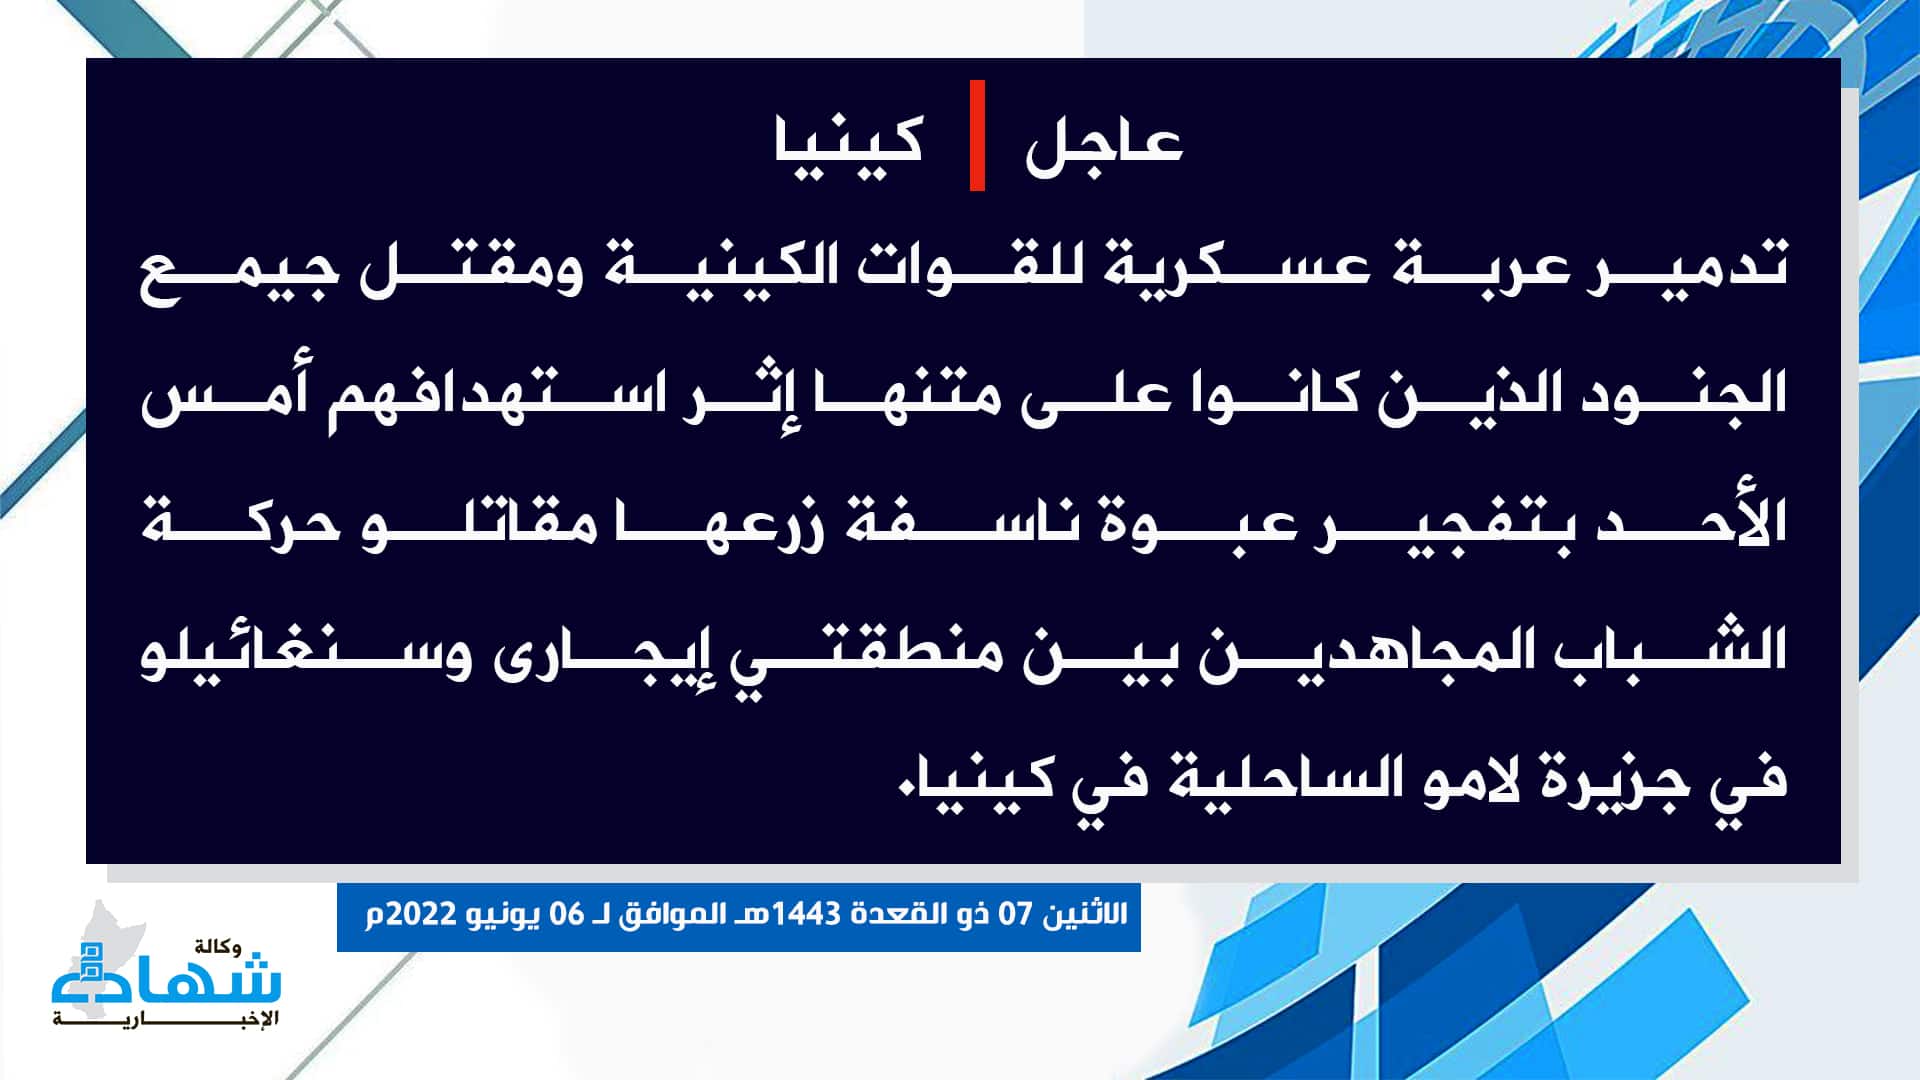 (Claim) al-Shabaab: Yesterday a Kenyan Army Vehicle Was Damaged and Those on Board Were Killed in an IED Attack Between Igari and Singhelo Areas, Lamo Coastal Island, Kenya - 6 June 2022